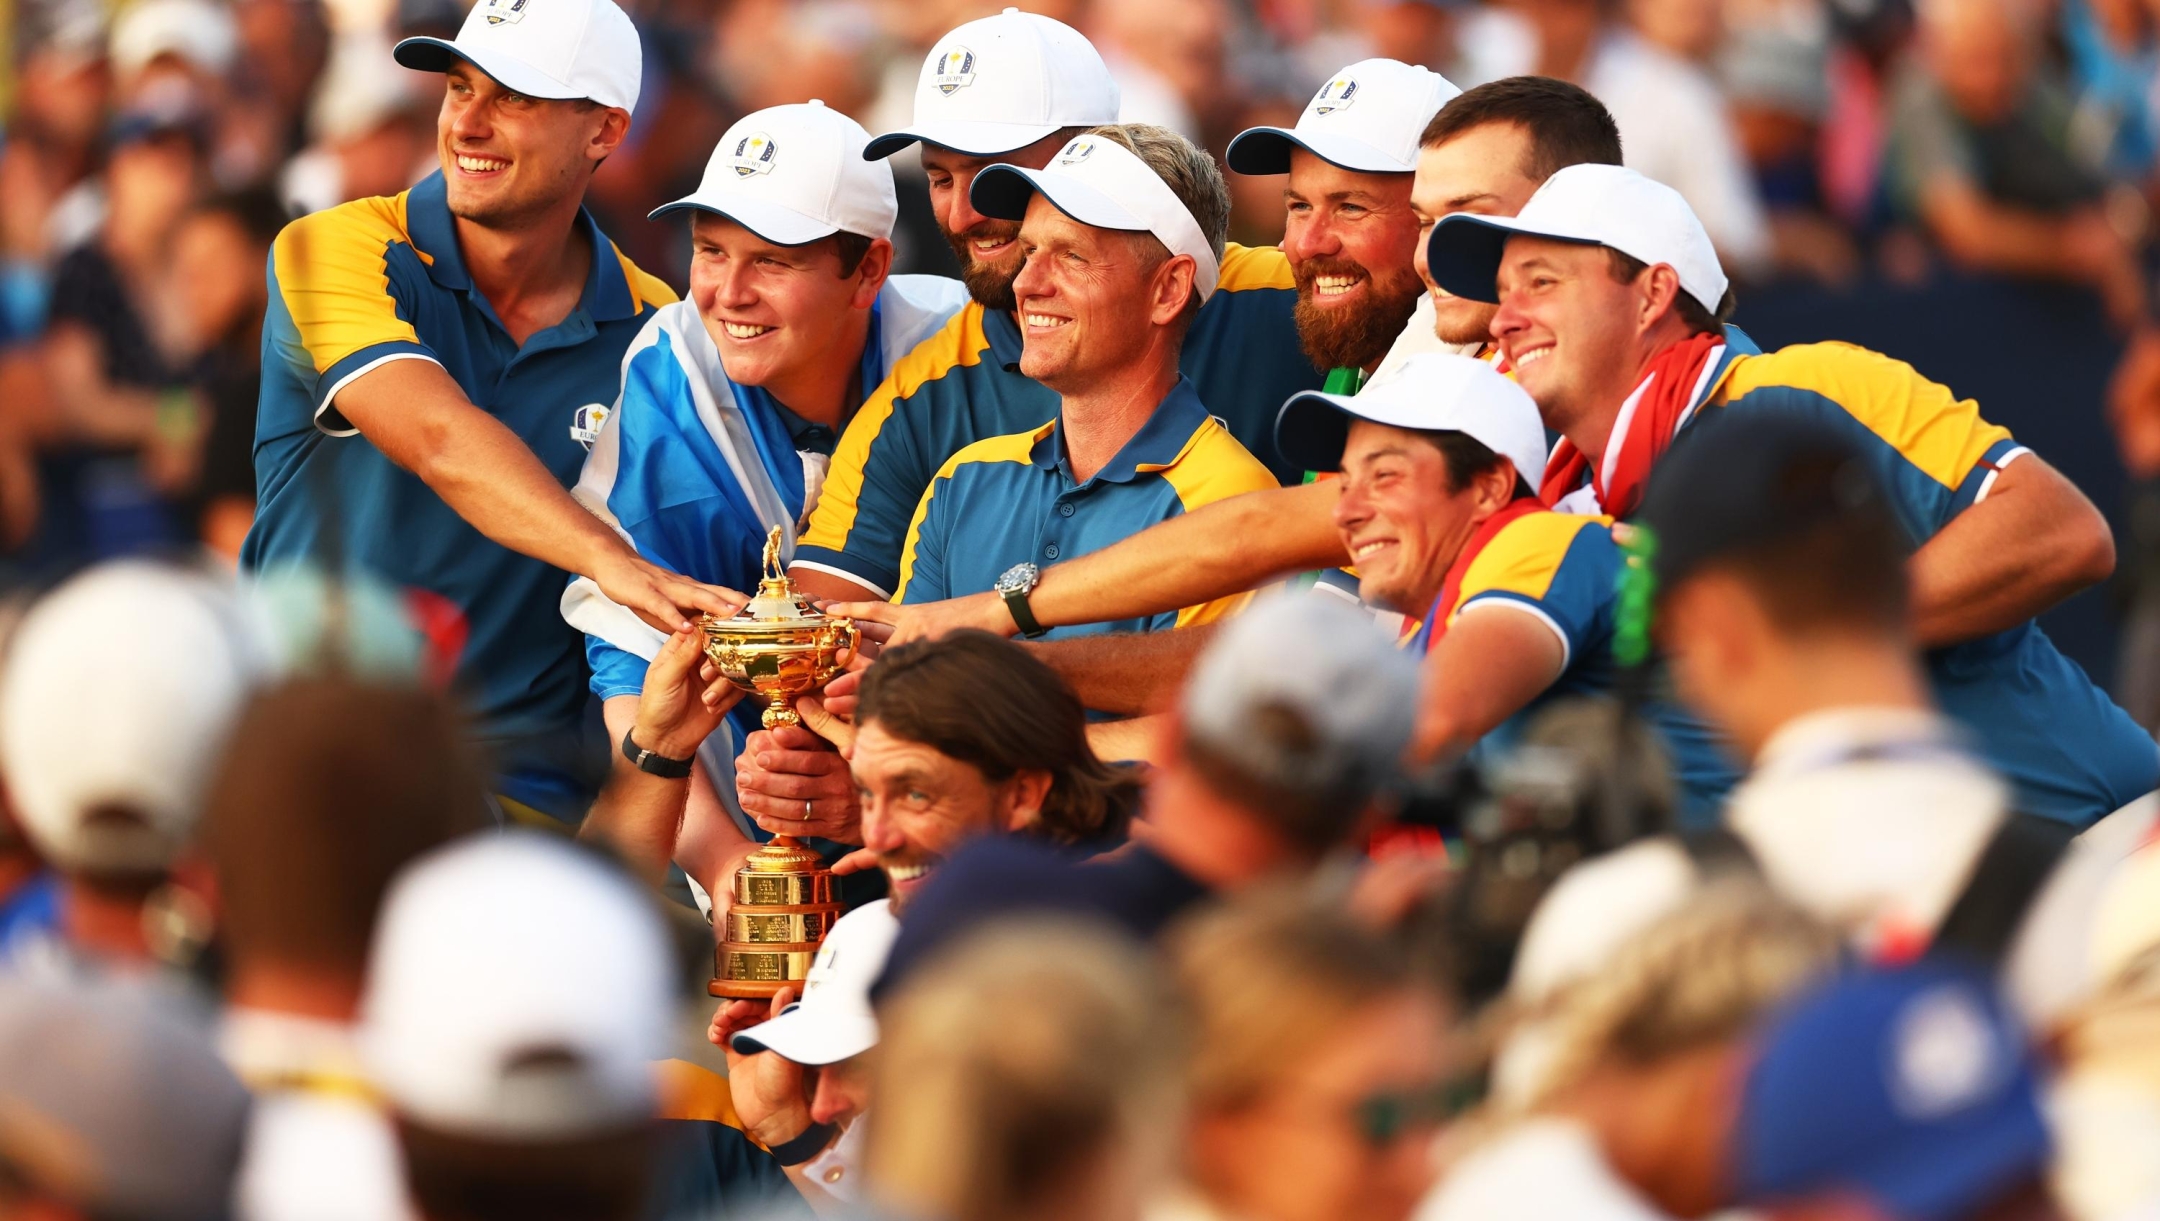 ROME, ITALY - OCTOBER 01: Team Europe Captain Luke Donald lifts the trophy with his team after his team win during the Sunday singles matches of the 2023 Ryder Cup at Marco Simone Golf Club on October 01, 2023 in Rome, Italy. (Photo by Naomi Baker/Getty Images)